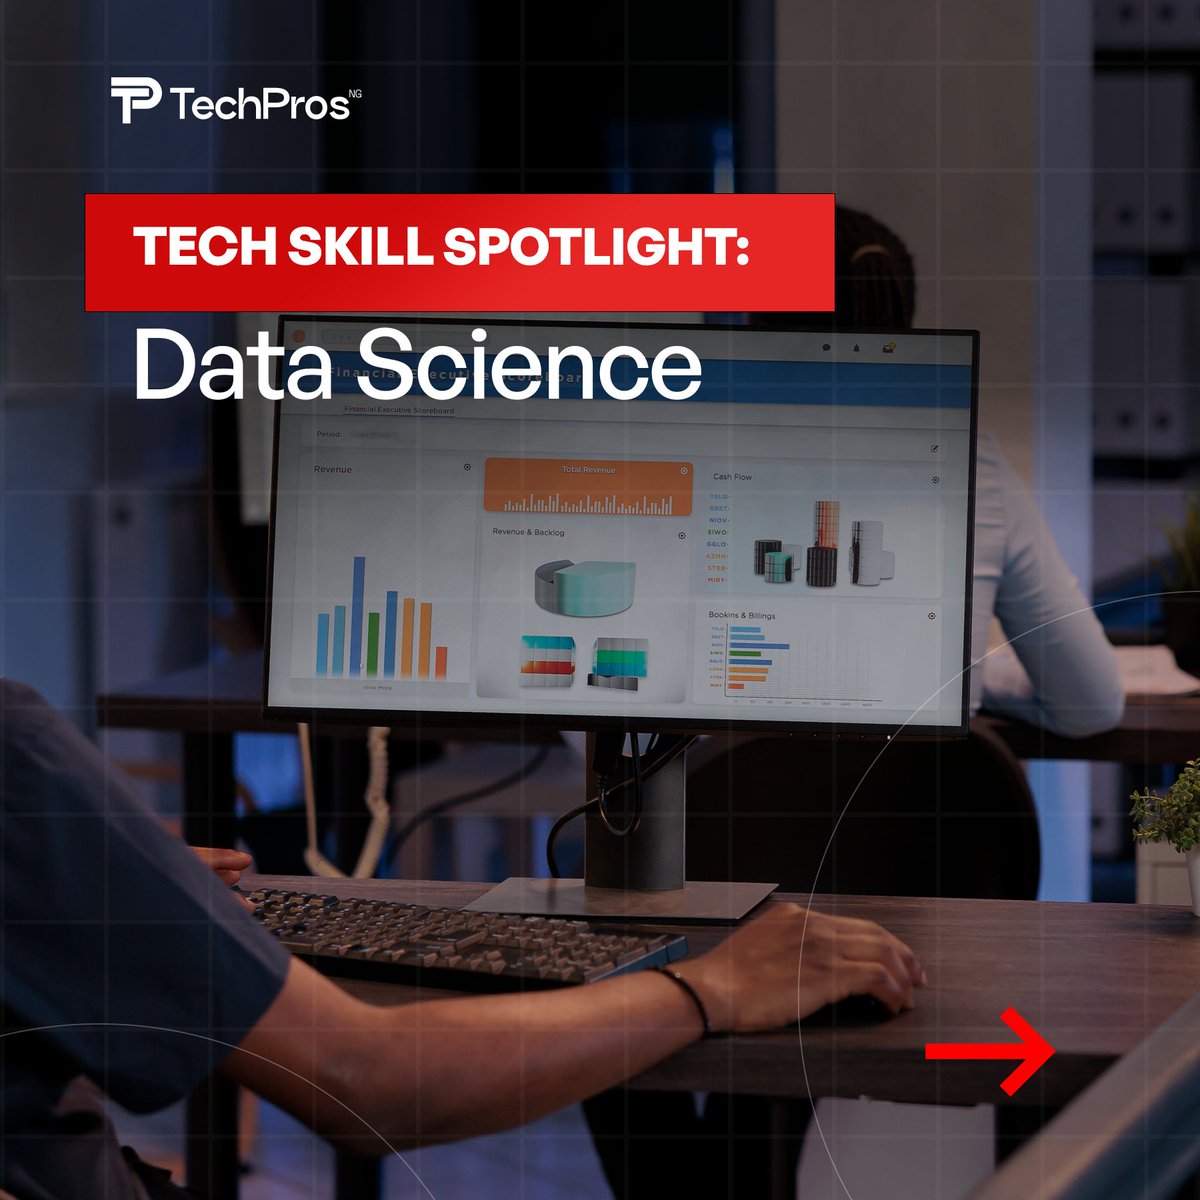 📊🌍 Ready to dive into the world of data science? 🚀 Our beginner's guide will show you the ropes! 🎯 Follow them to take your first step into the exciting world of data.

#TechProsNG #DataScience101 #TechSkills #DataJourney #BeginnersGuide #DataNewbies